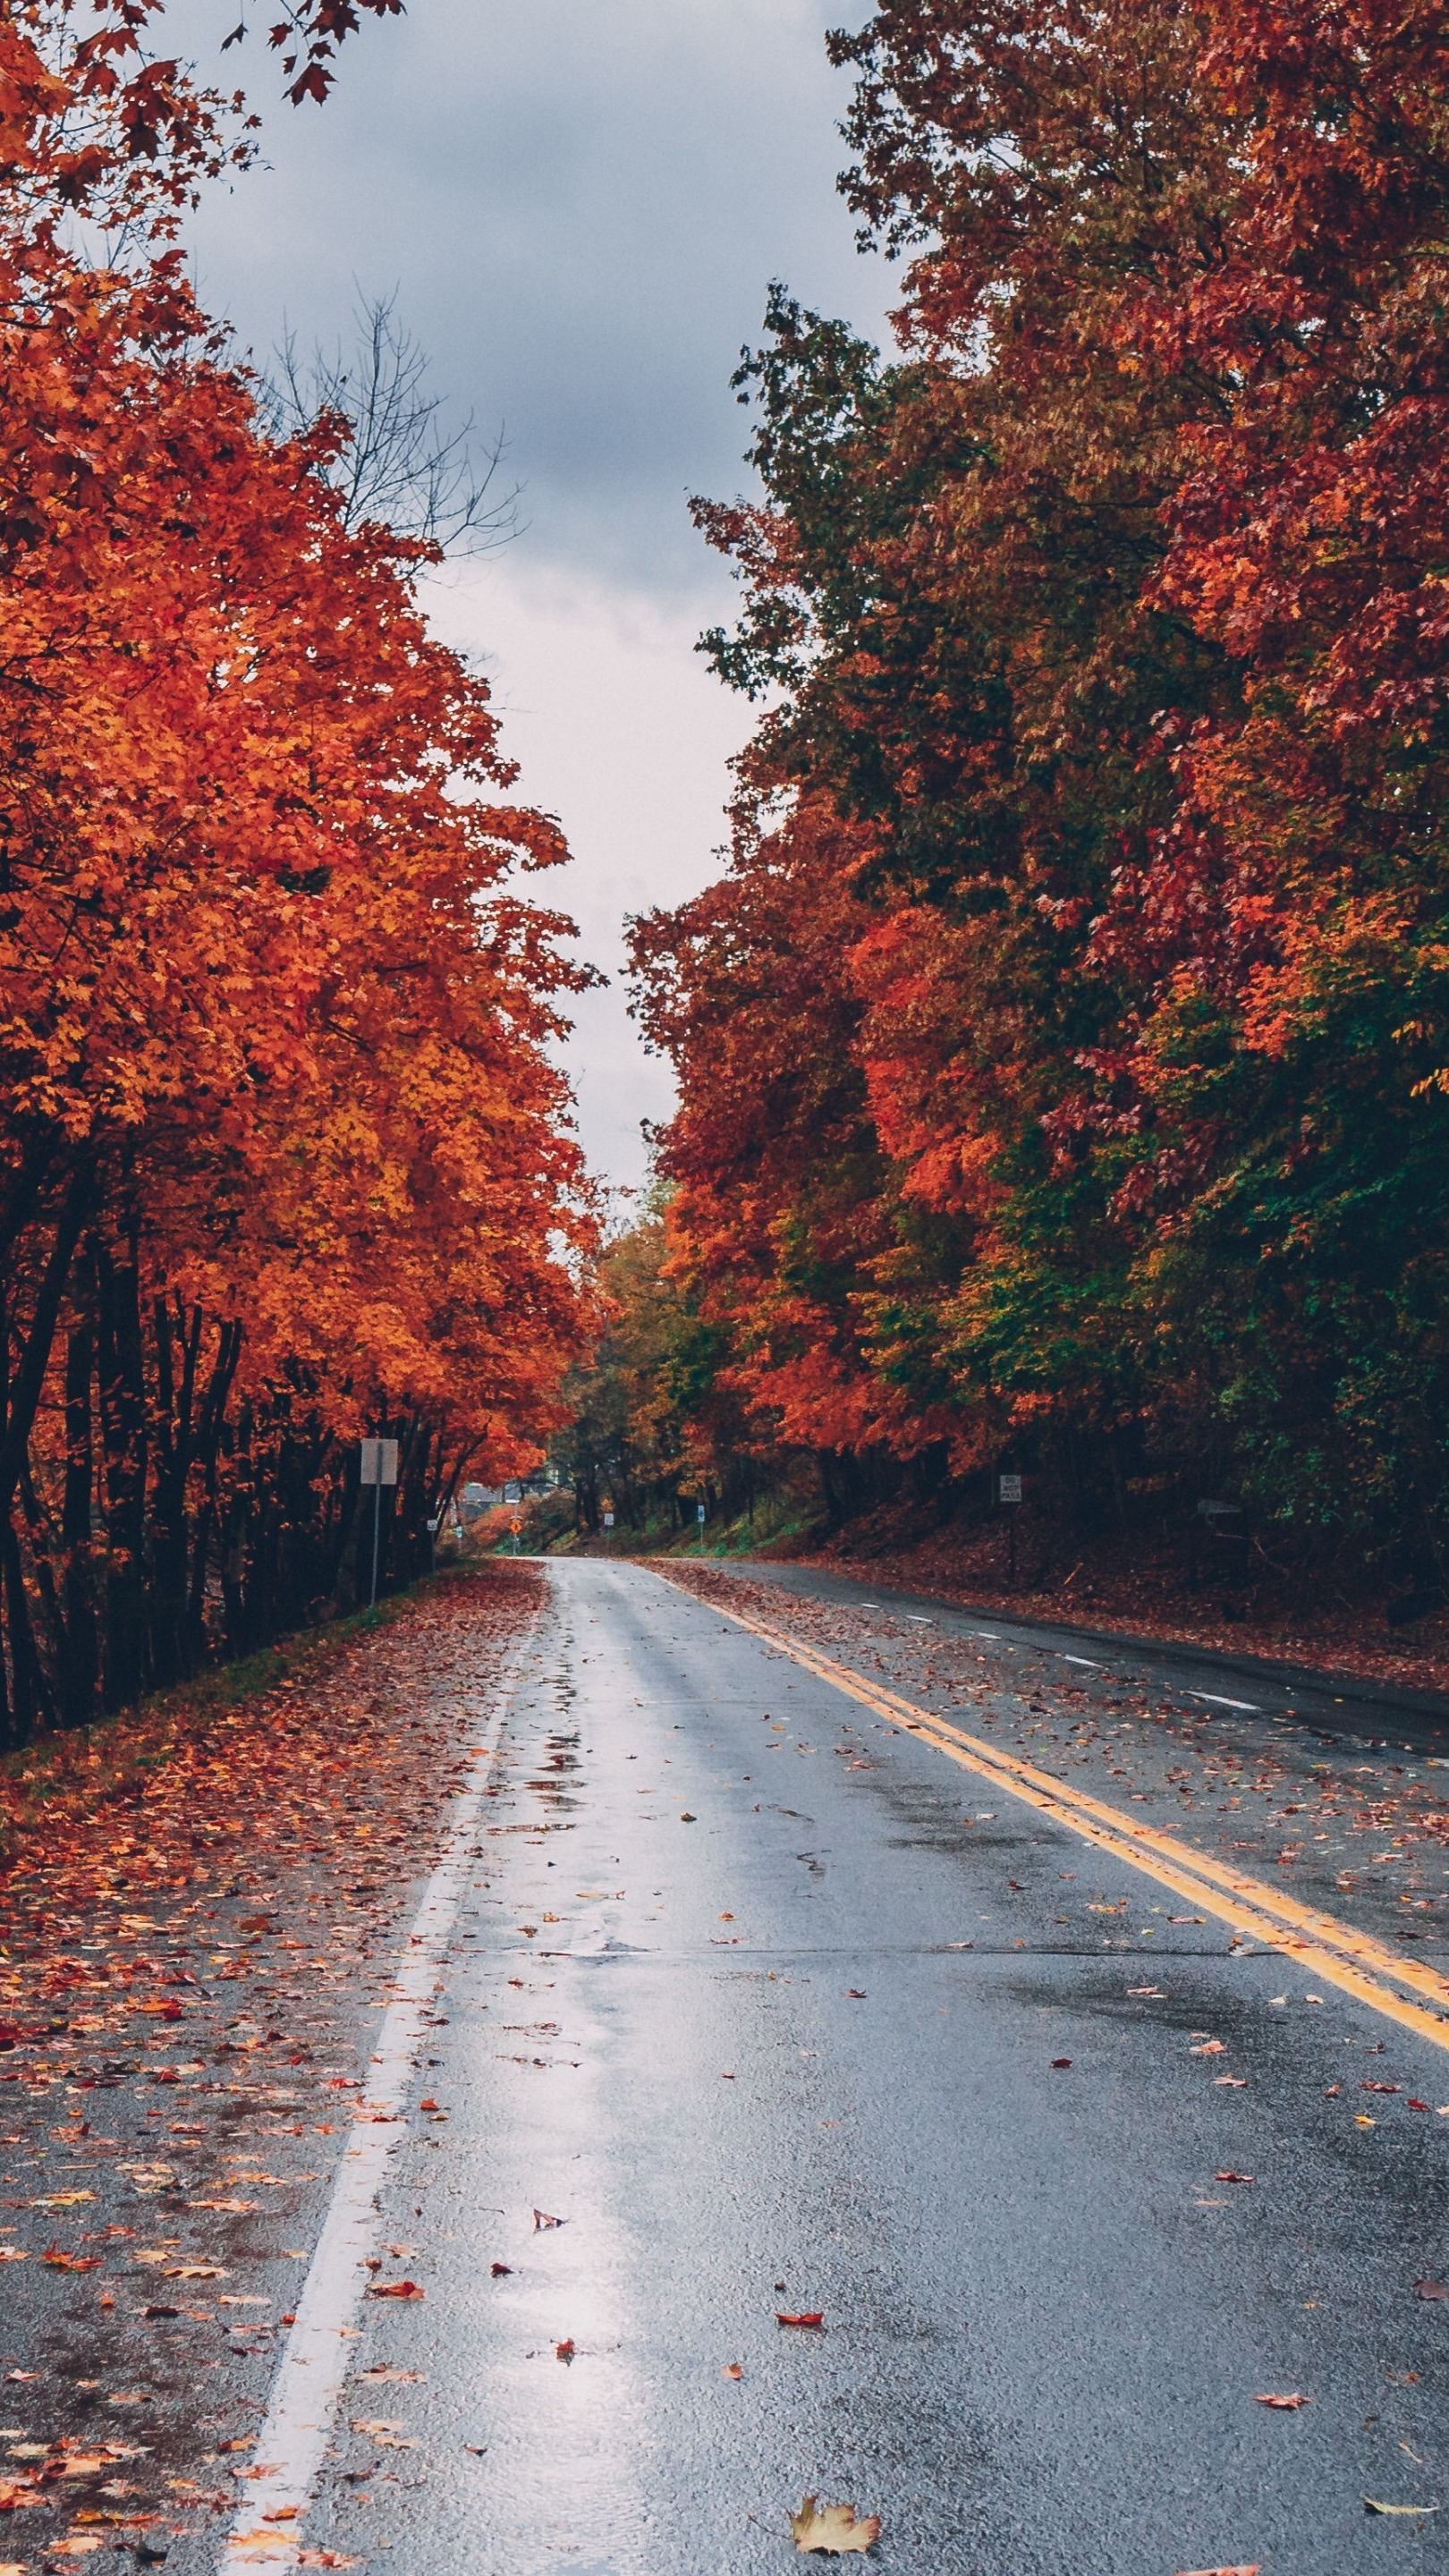 Wet fall road - backiee